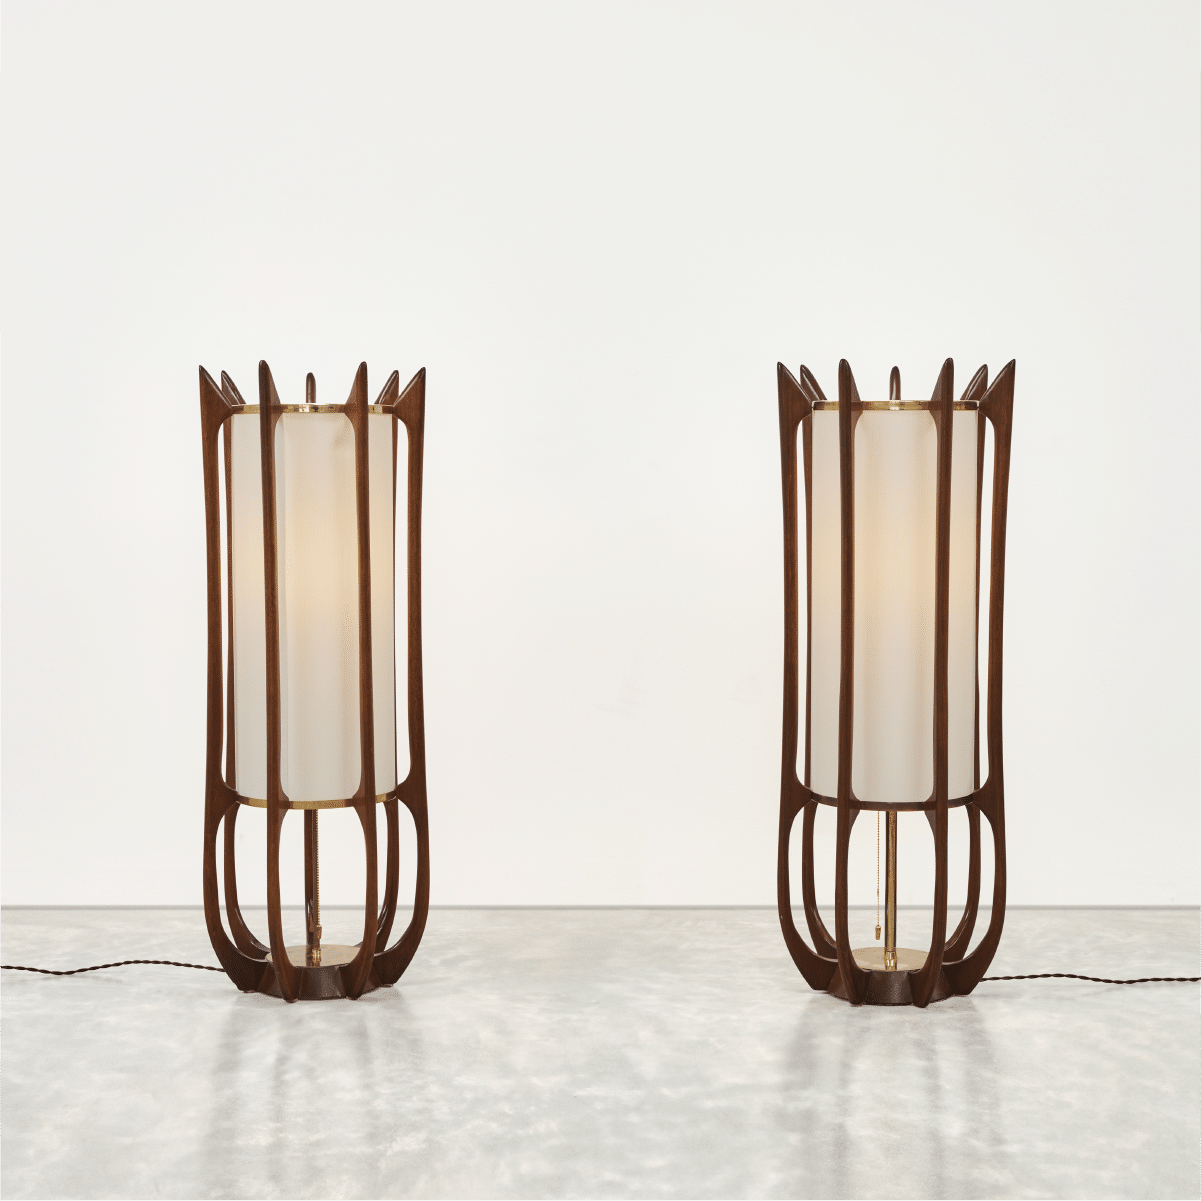 Low res for web_Pair of New Hope Table Lamps-